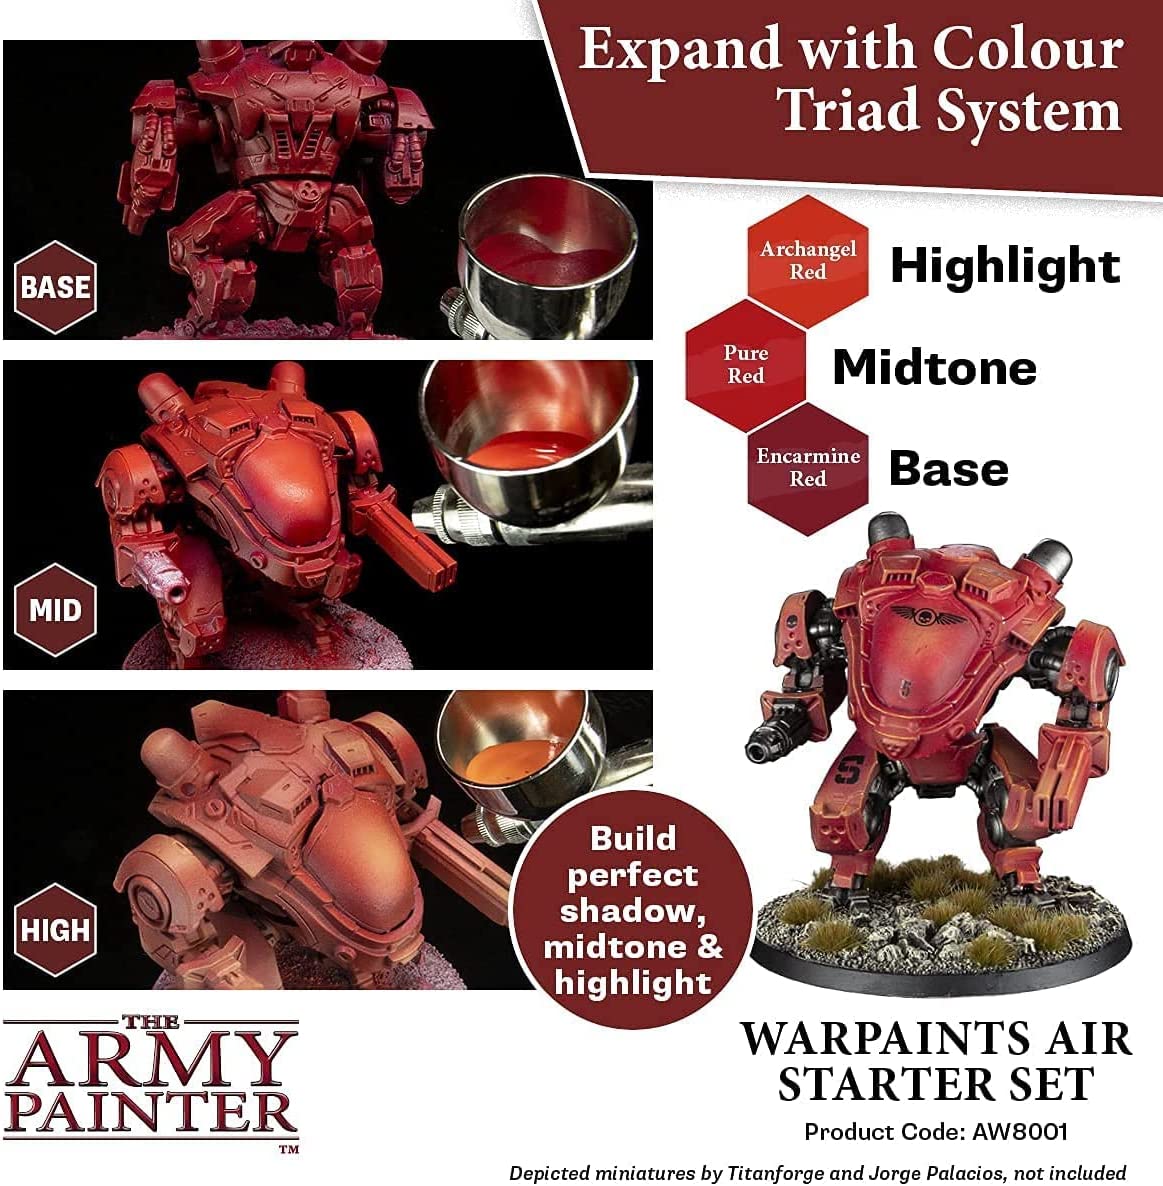 The Army Painter - Starter Airbrush Paint Set and Airbrush Thinner